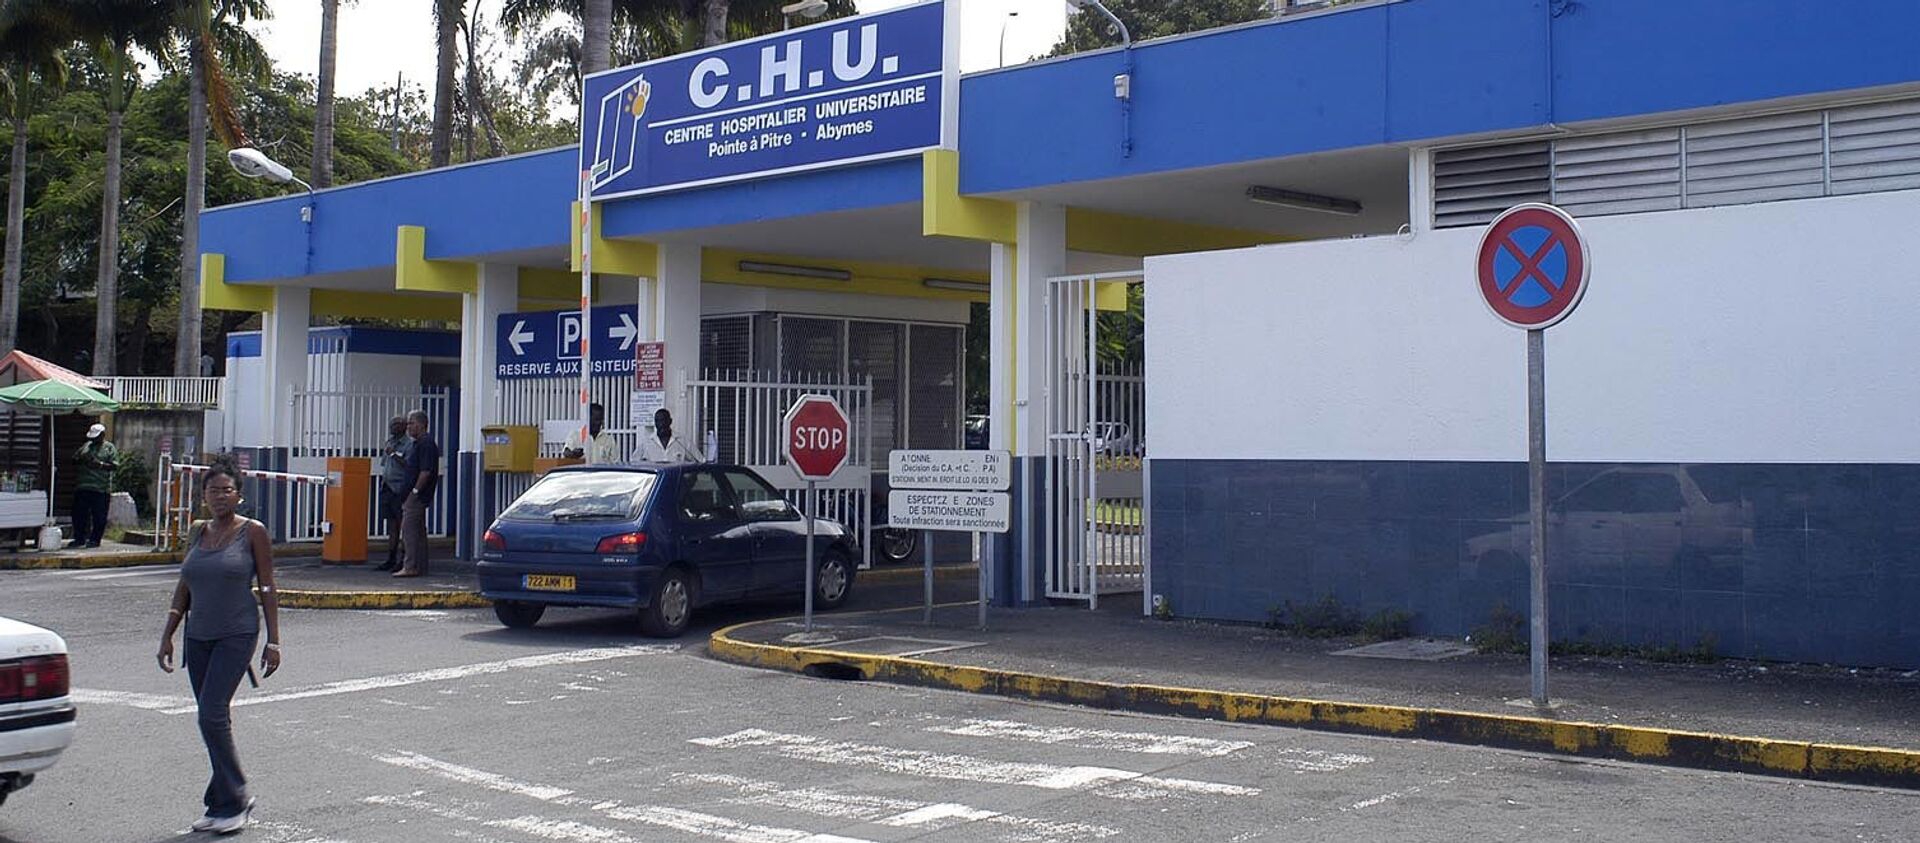 A picture taken on August 27, 2012 shows the entrance of the Pointe-a-Pitre CHU (University Hospital) in the French Caribbean overseas department of Guadeloupe, where French rock star Johnny Hallyday was hospitalized before being transferred for a cardiological assessment to Fort-de-France CHU in the caribbean island of La Martinique. - Sputnik Afrique, 1920, 02.08.2019